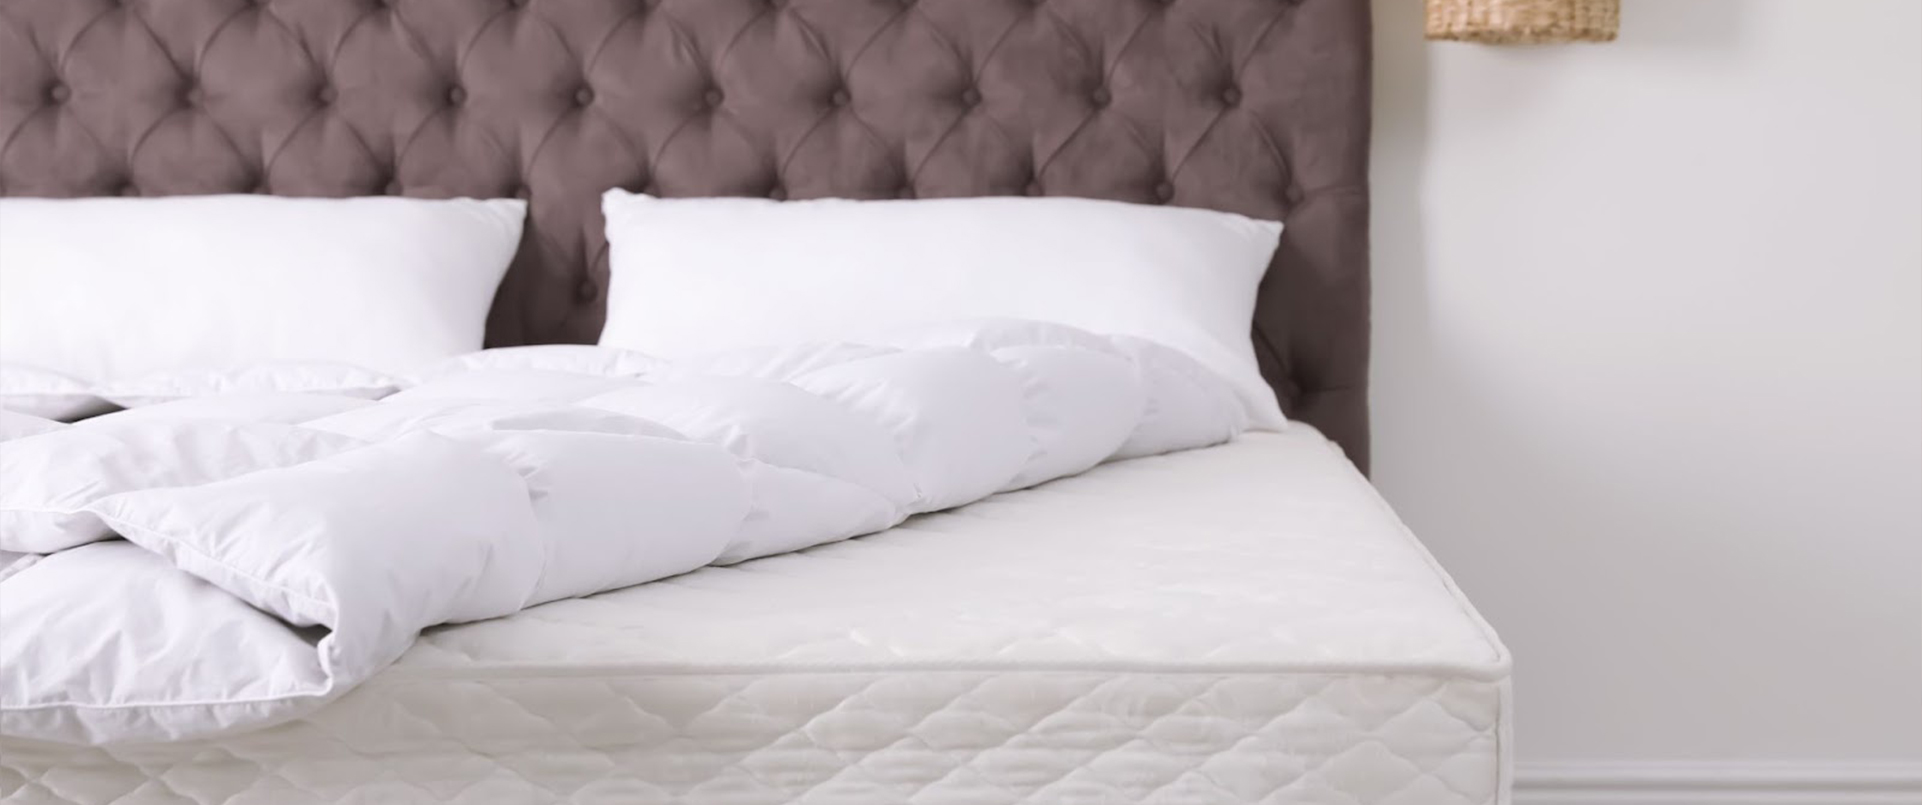 Things to Consider When Buying a Luxury Mattress